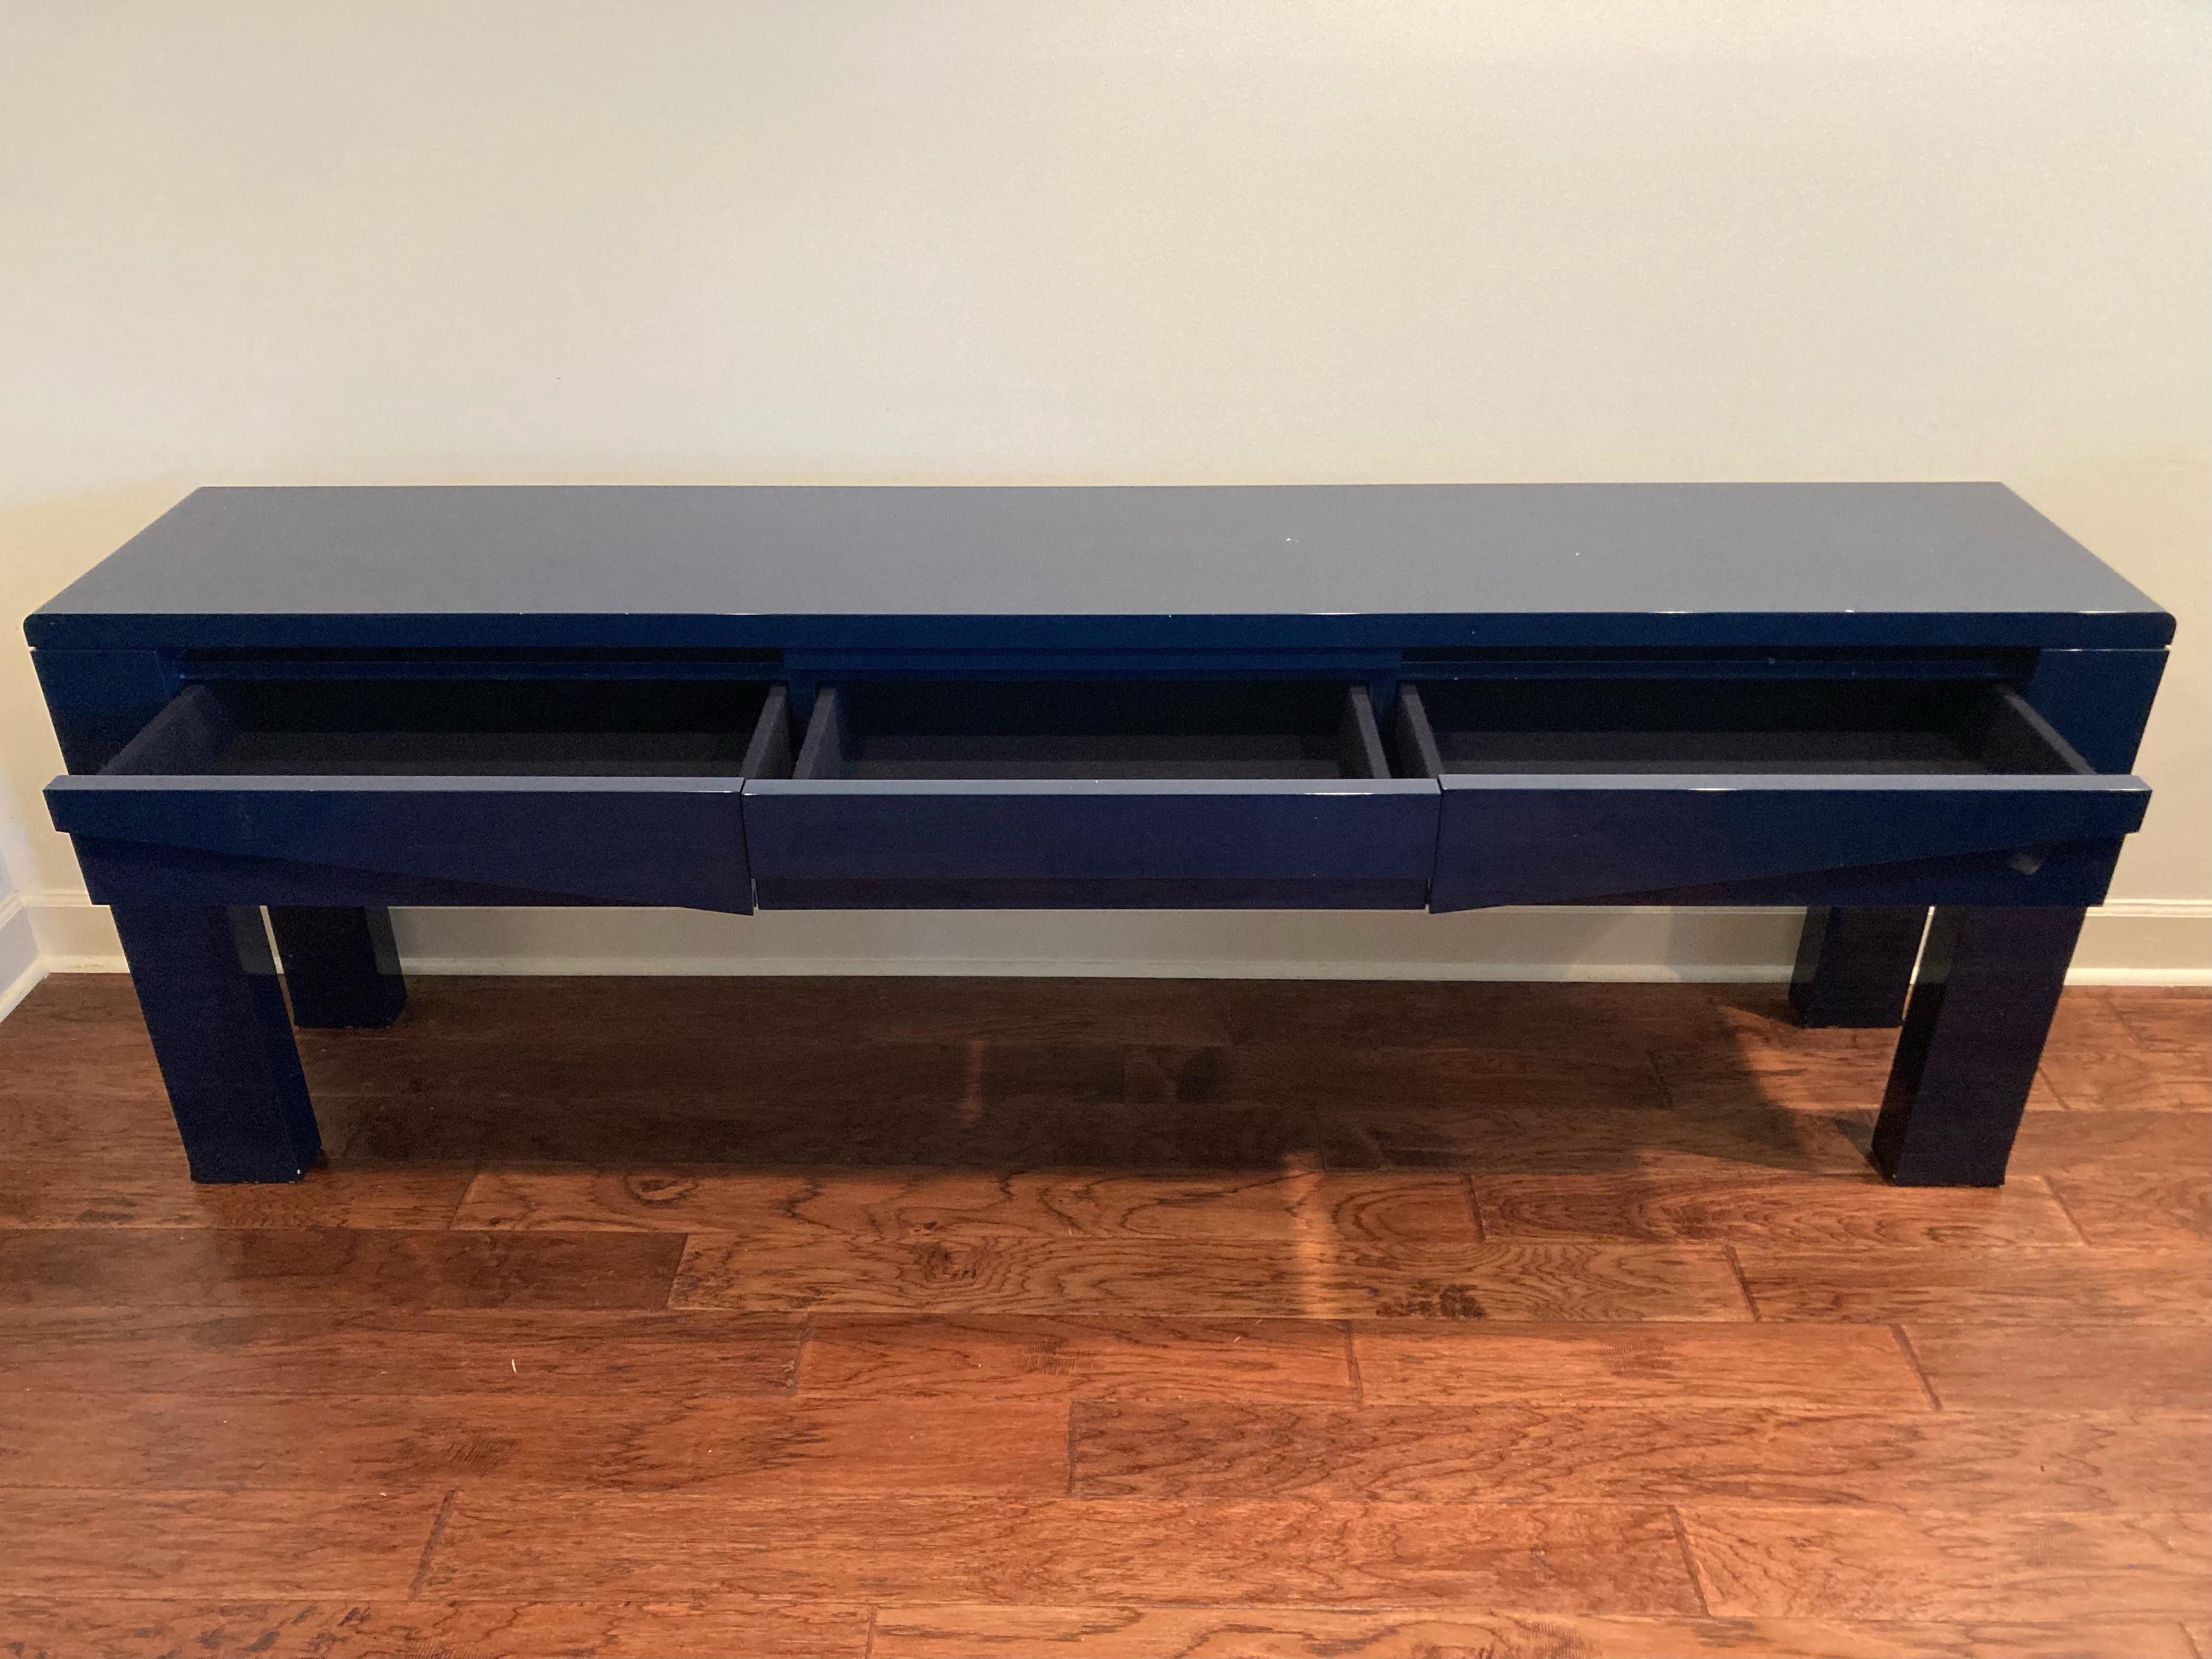 Super sleek sophisticated glistening midnight blue lacquer console by famous Belgian designer Emiel Veranneman by DeCoene Decor. There are 3 drawers on the front side.